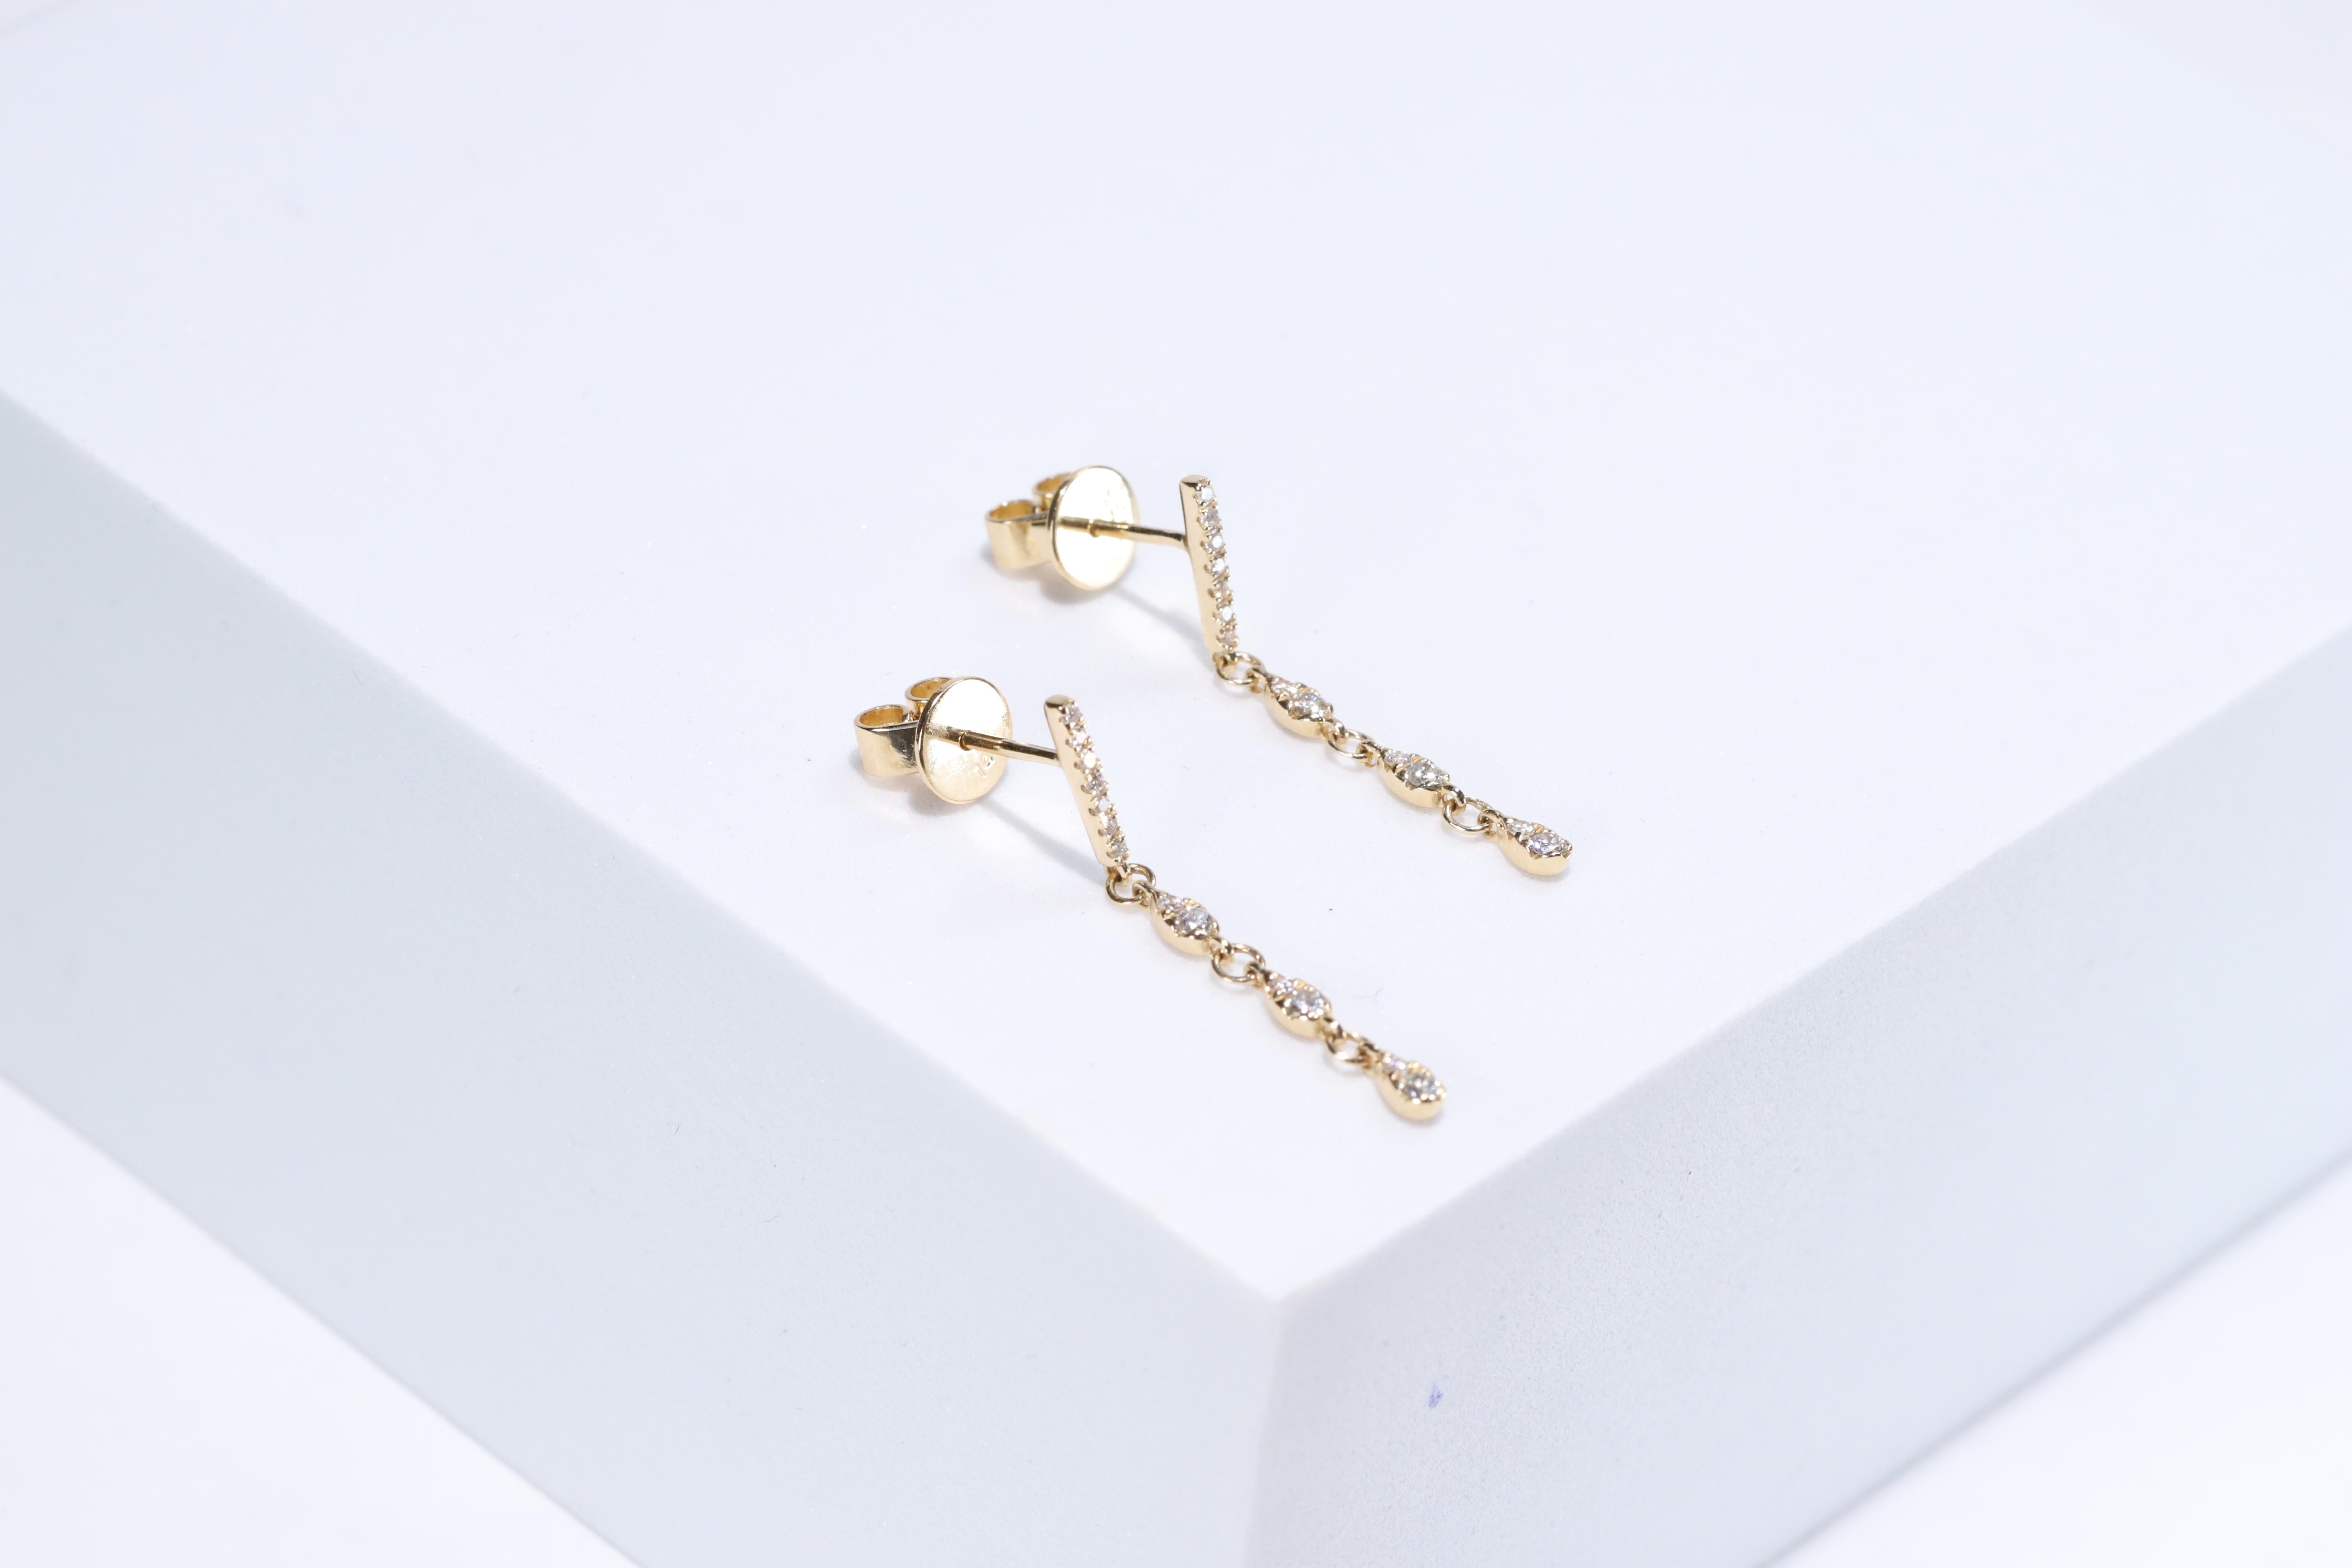 Each of these pretty earrings from Gin & Grace features a with white diamonds. These earrings are made of rich 14-karat Yellow gold with a high polish. Style: Dangle, Diamonds: 26 pcs Diamond cut: Round Diamond weight: 0.20 carat Color: G-H Clarity: